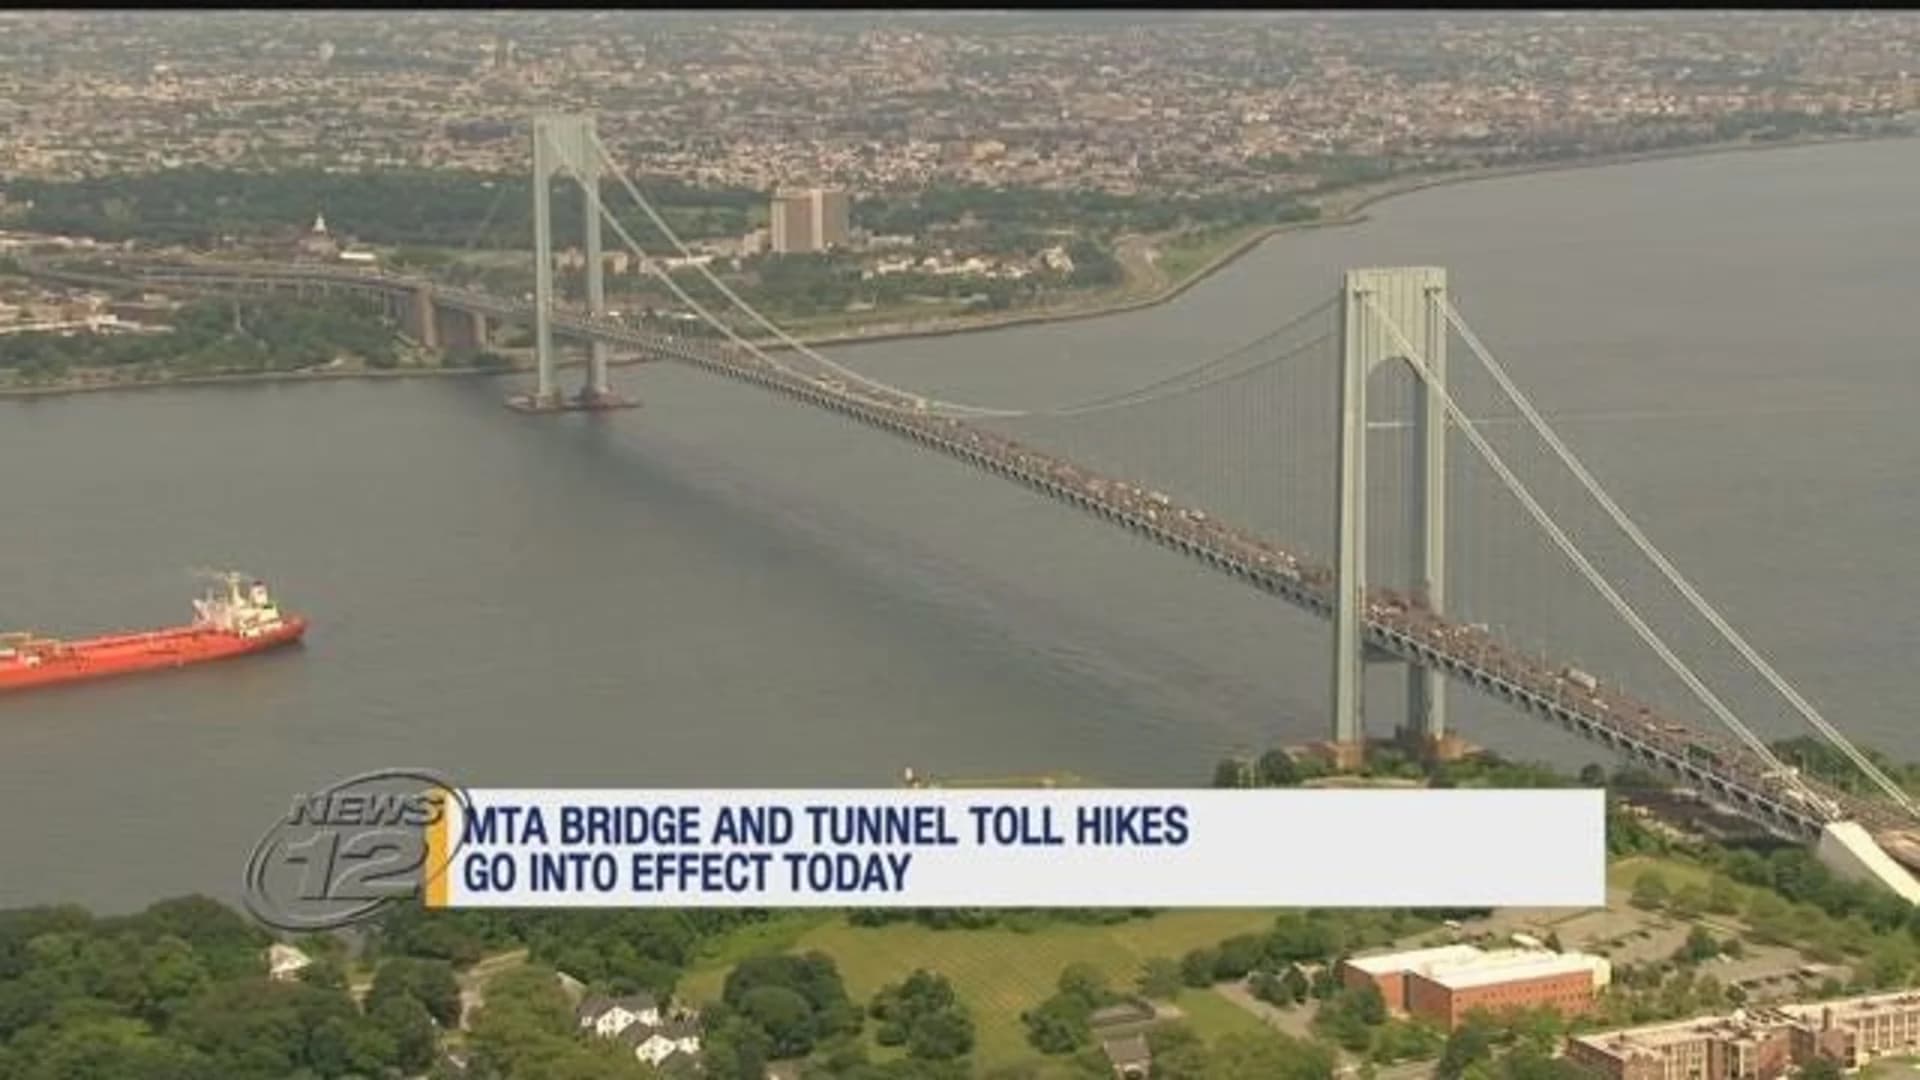 Toll hike for MTA bridges, tunnels goes into effect